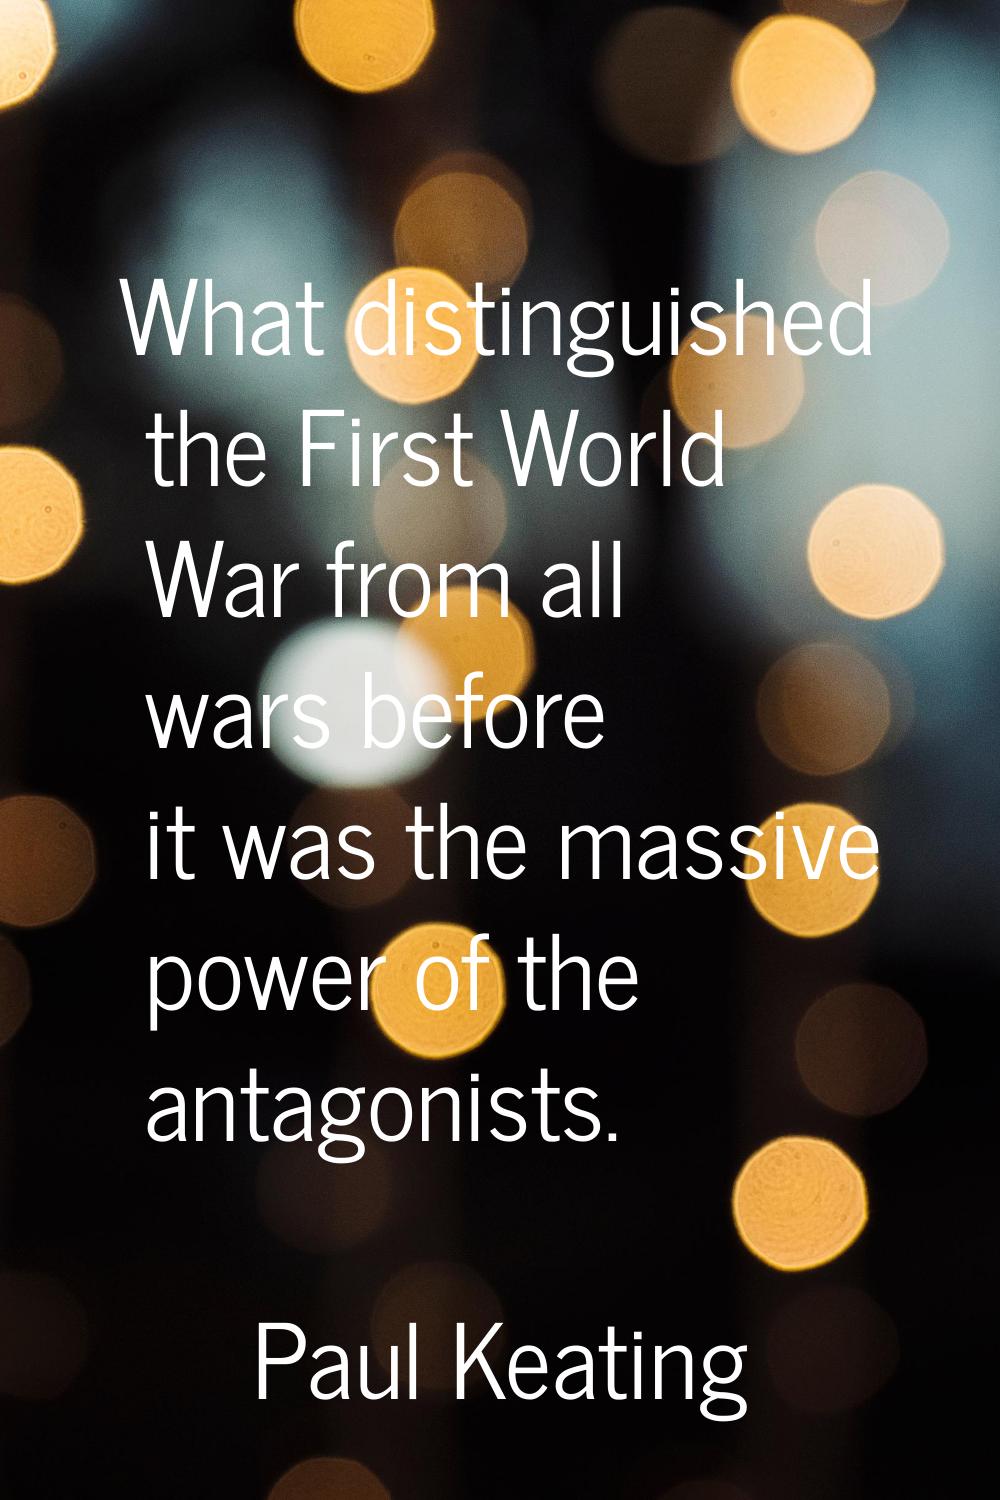 What distinguished the First World War from all wars before it was the massive power of the antagon